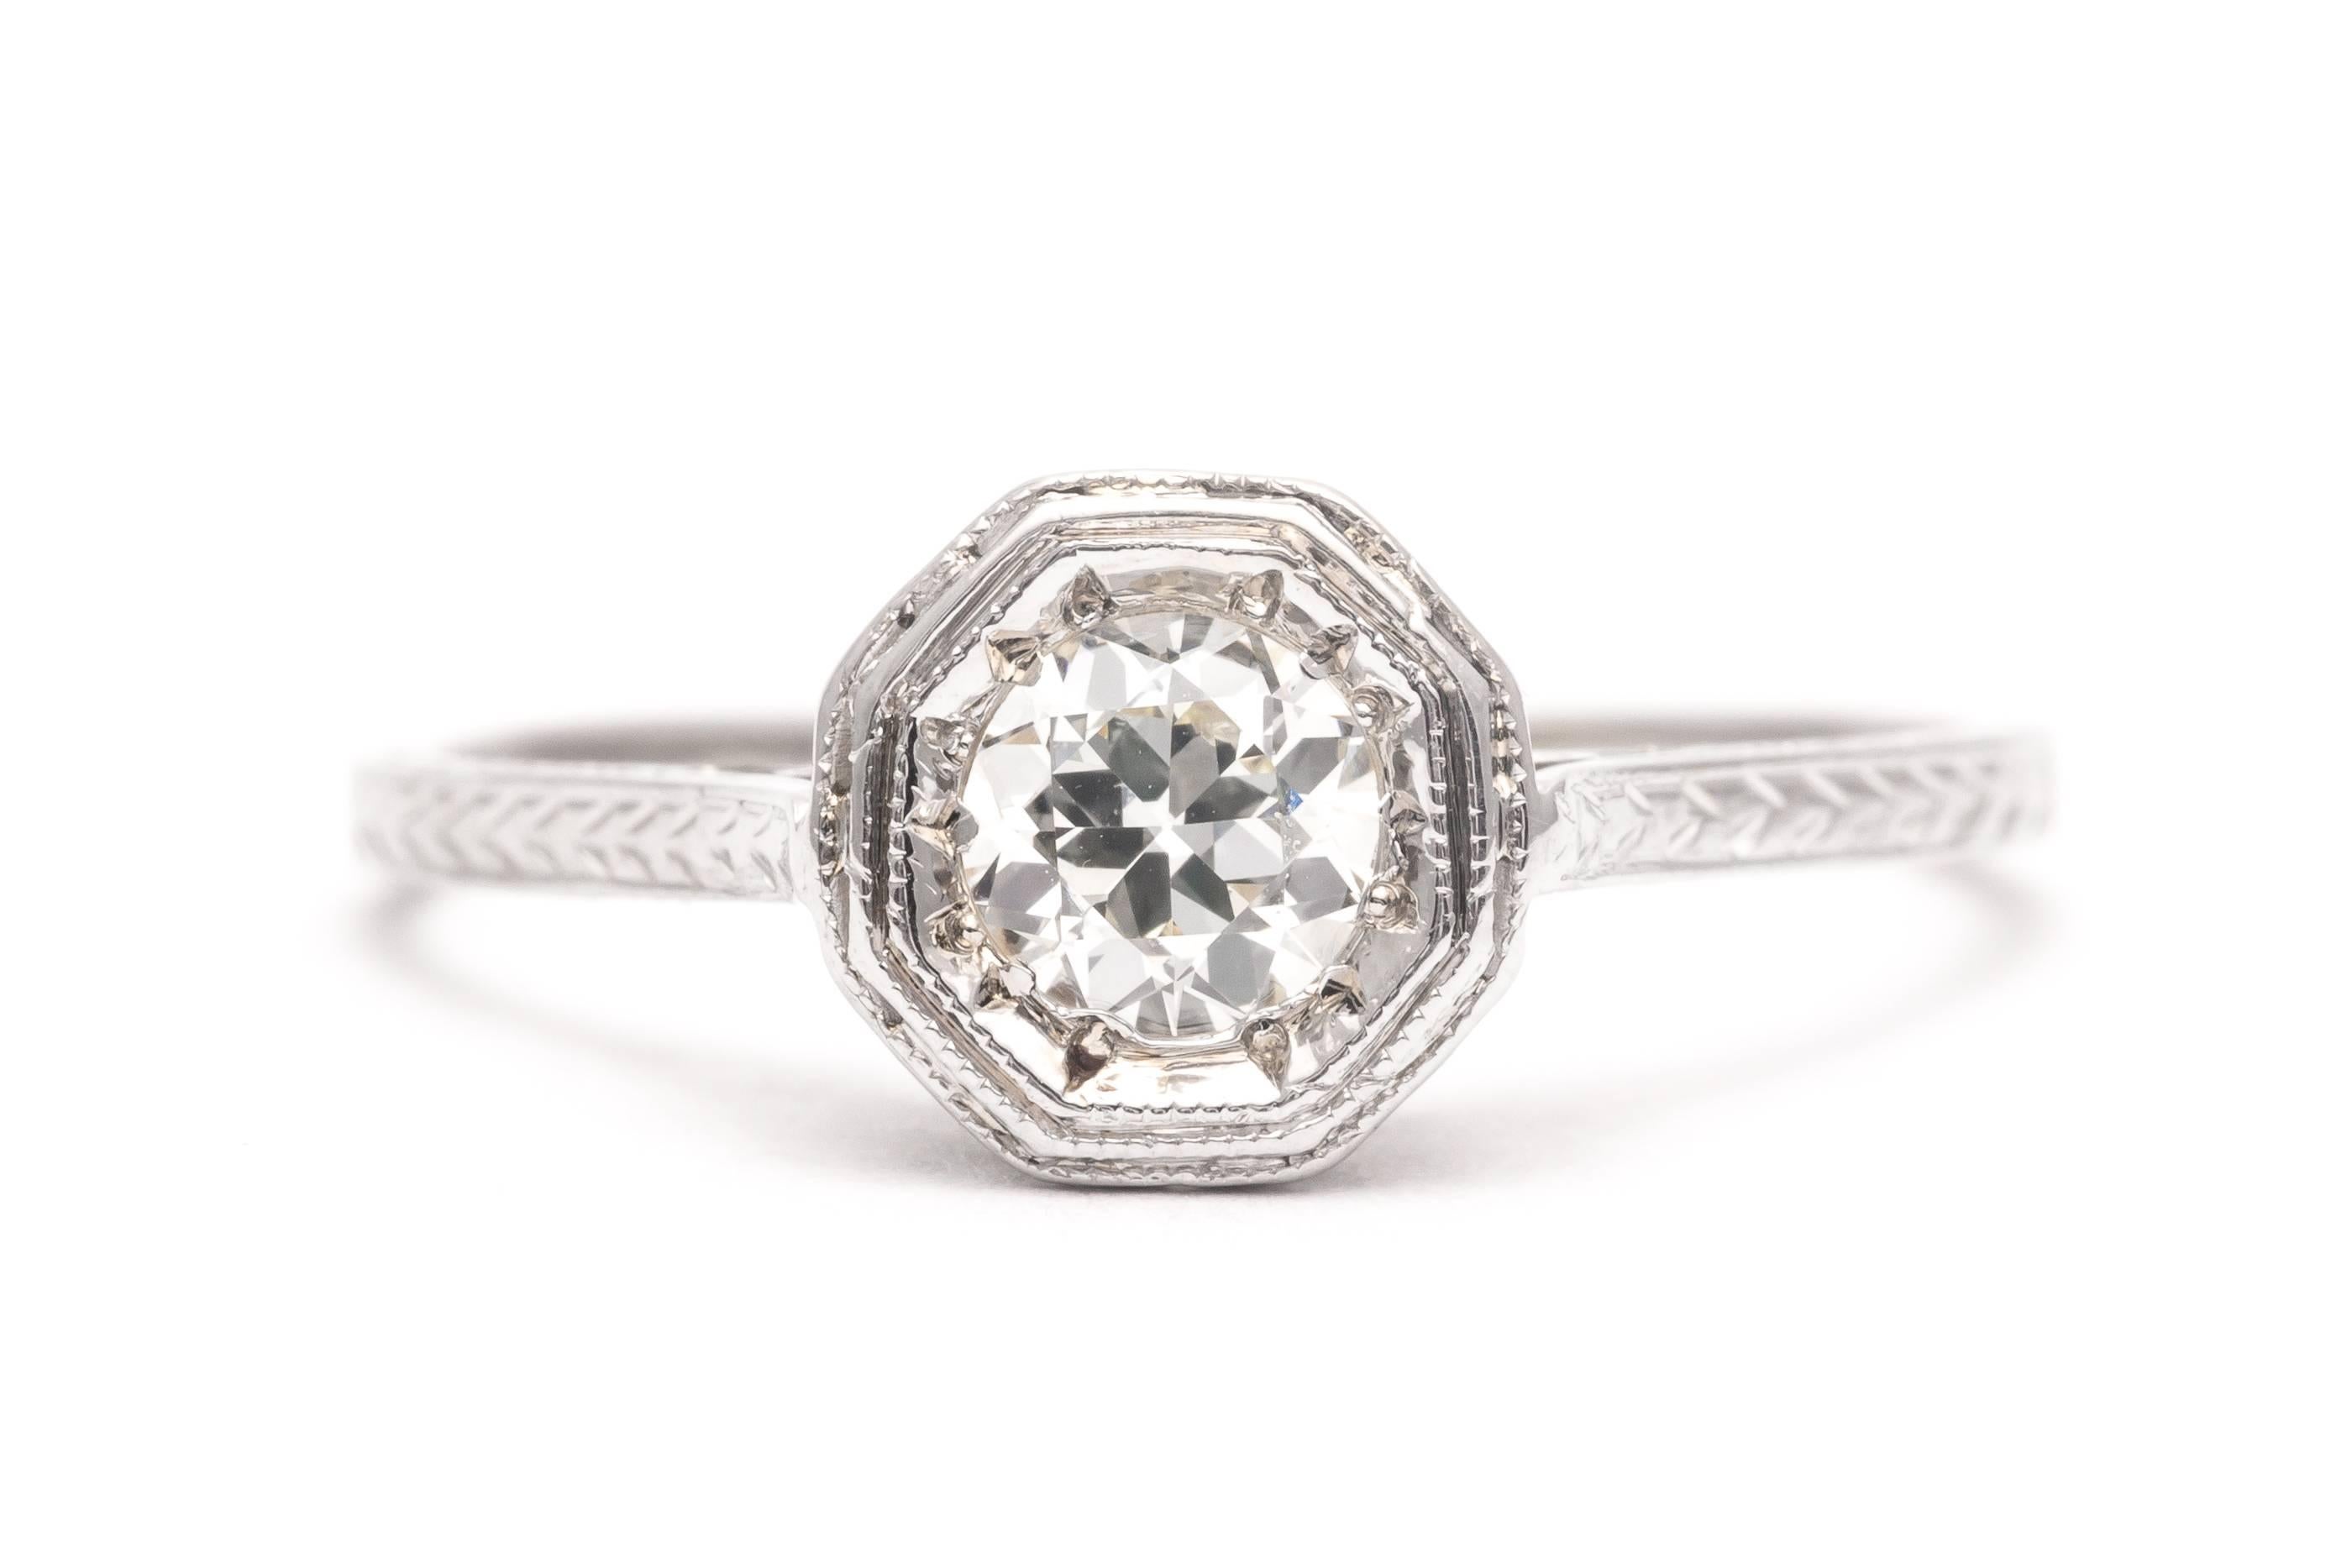 Beacon Hill Jewelers Presents:

A beautiful art deco period diamond solitaire engagement ring in 14 karat white gold. Set with a single old European cut diamond this ring features beautiful hand wrought filigree work on the north and south sides